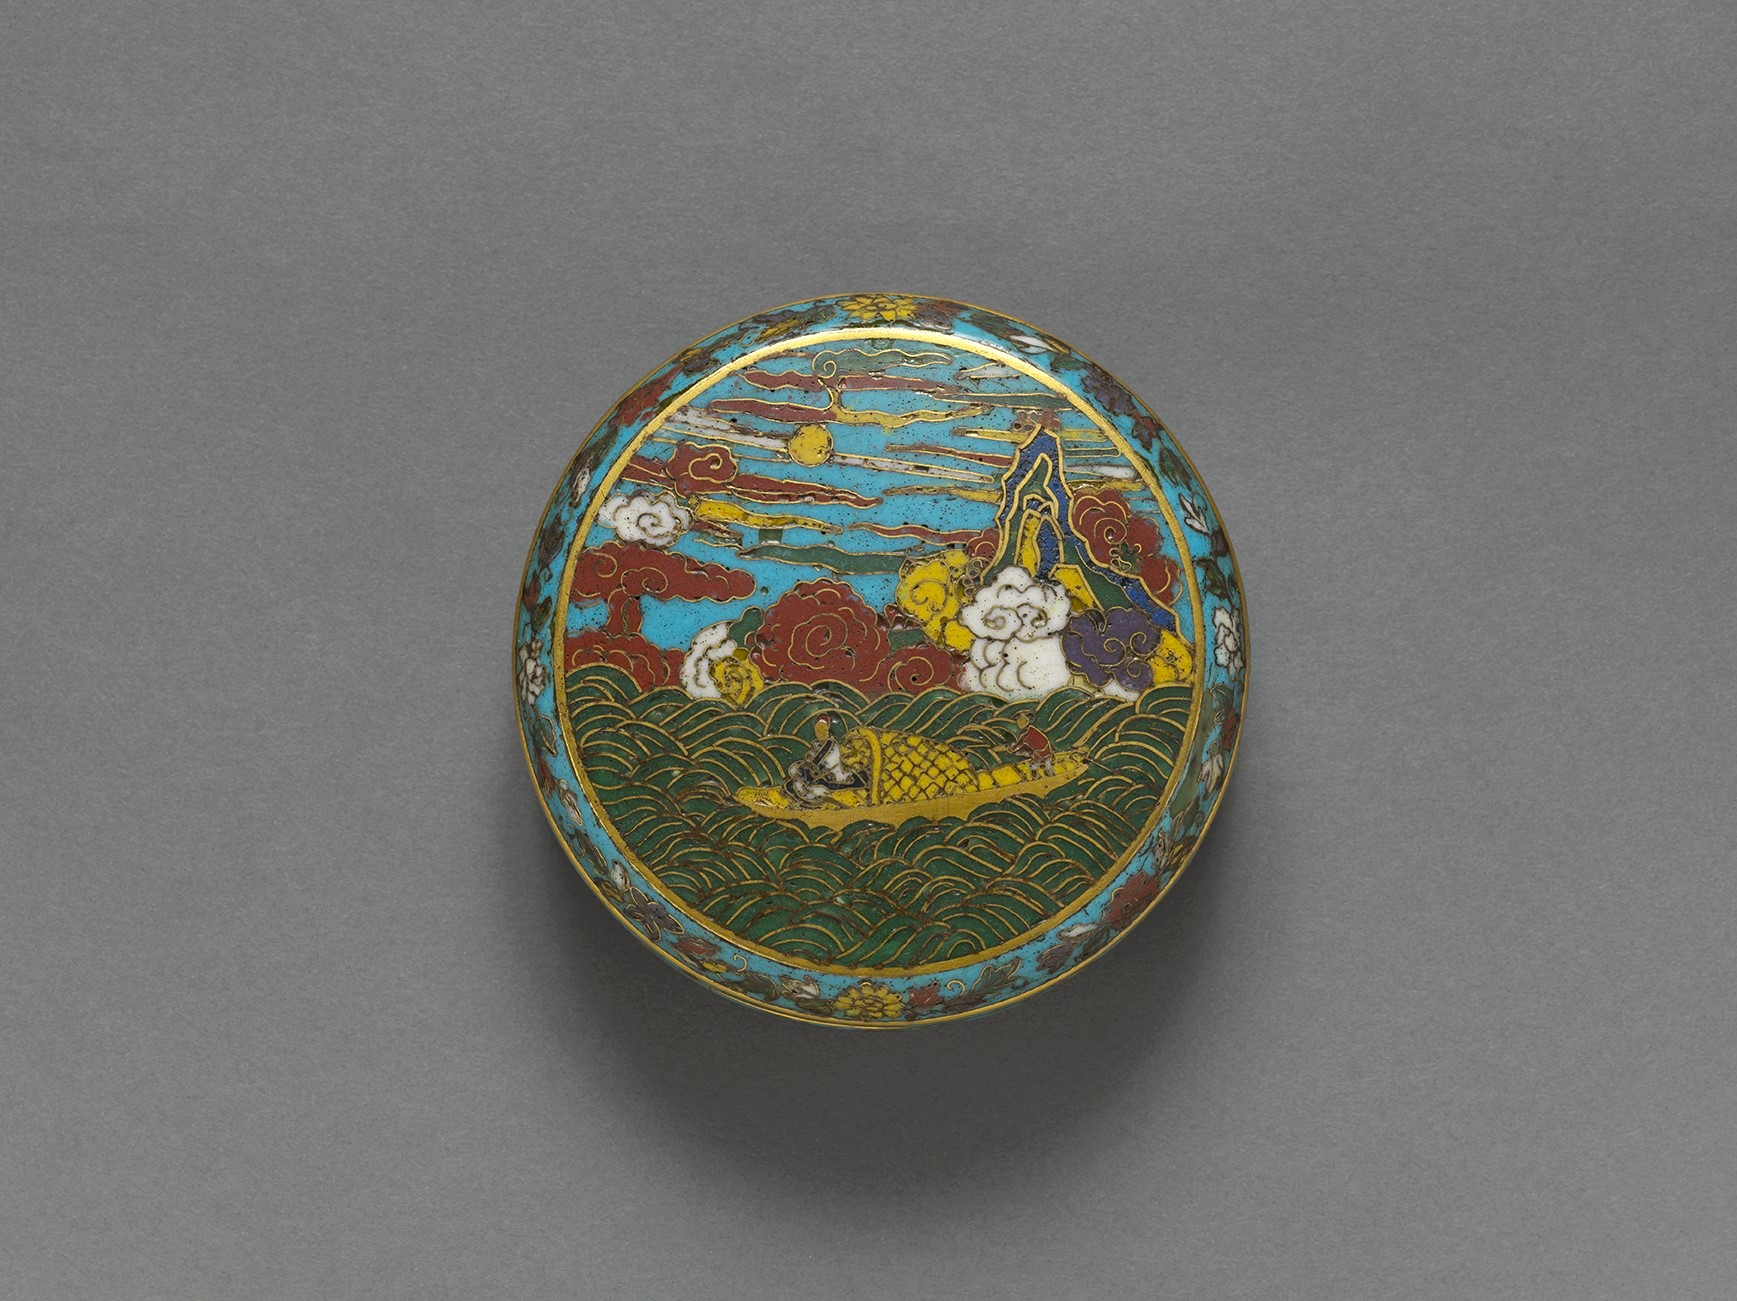 An important cloisonné enamel literati subject box and cover